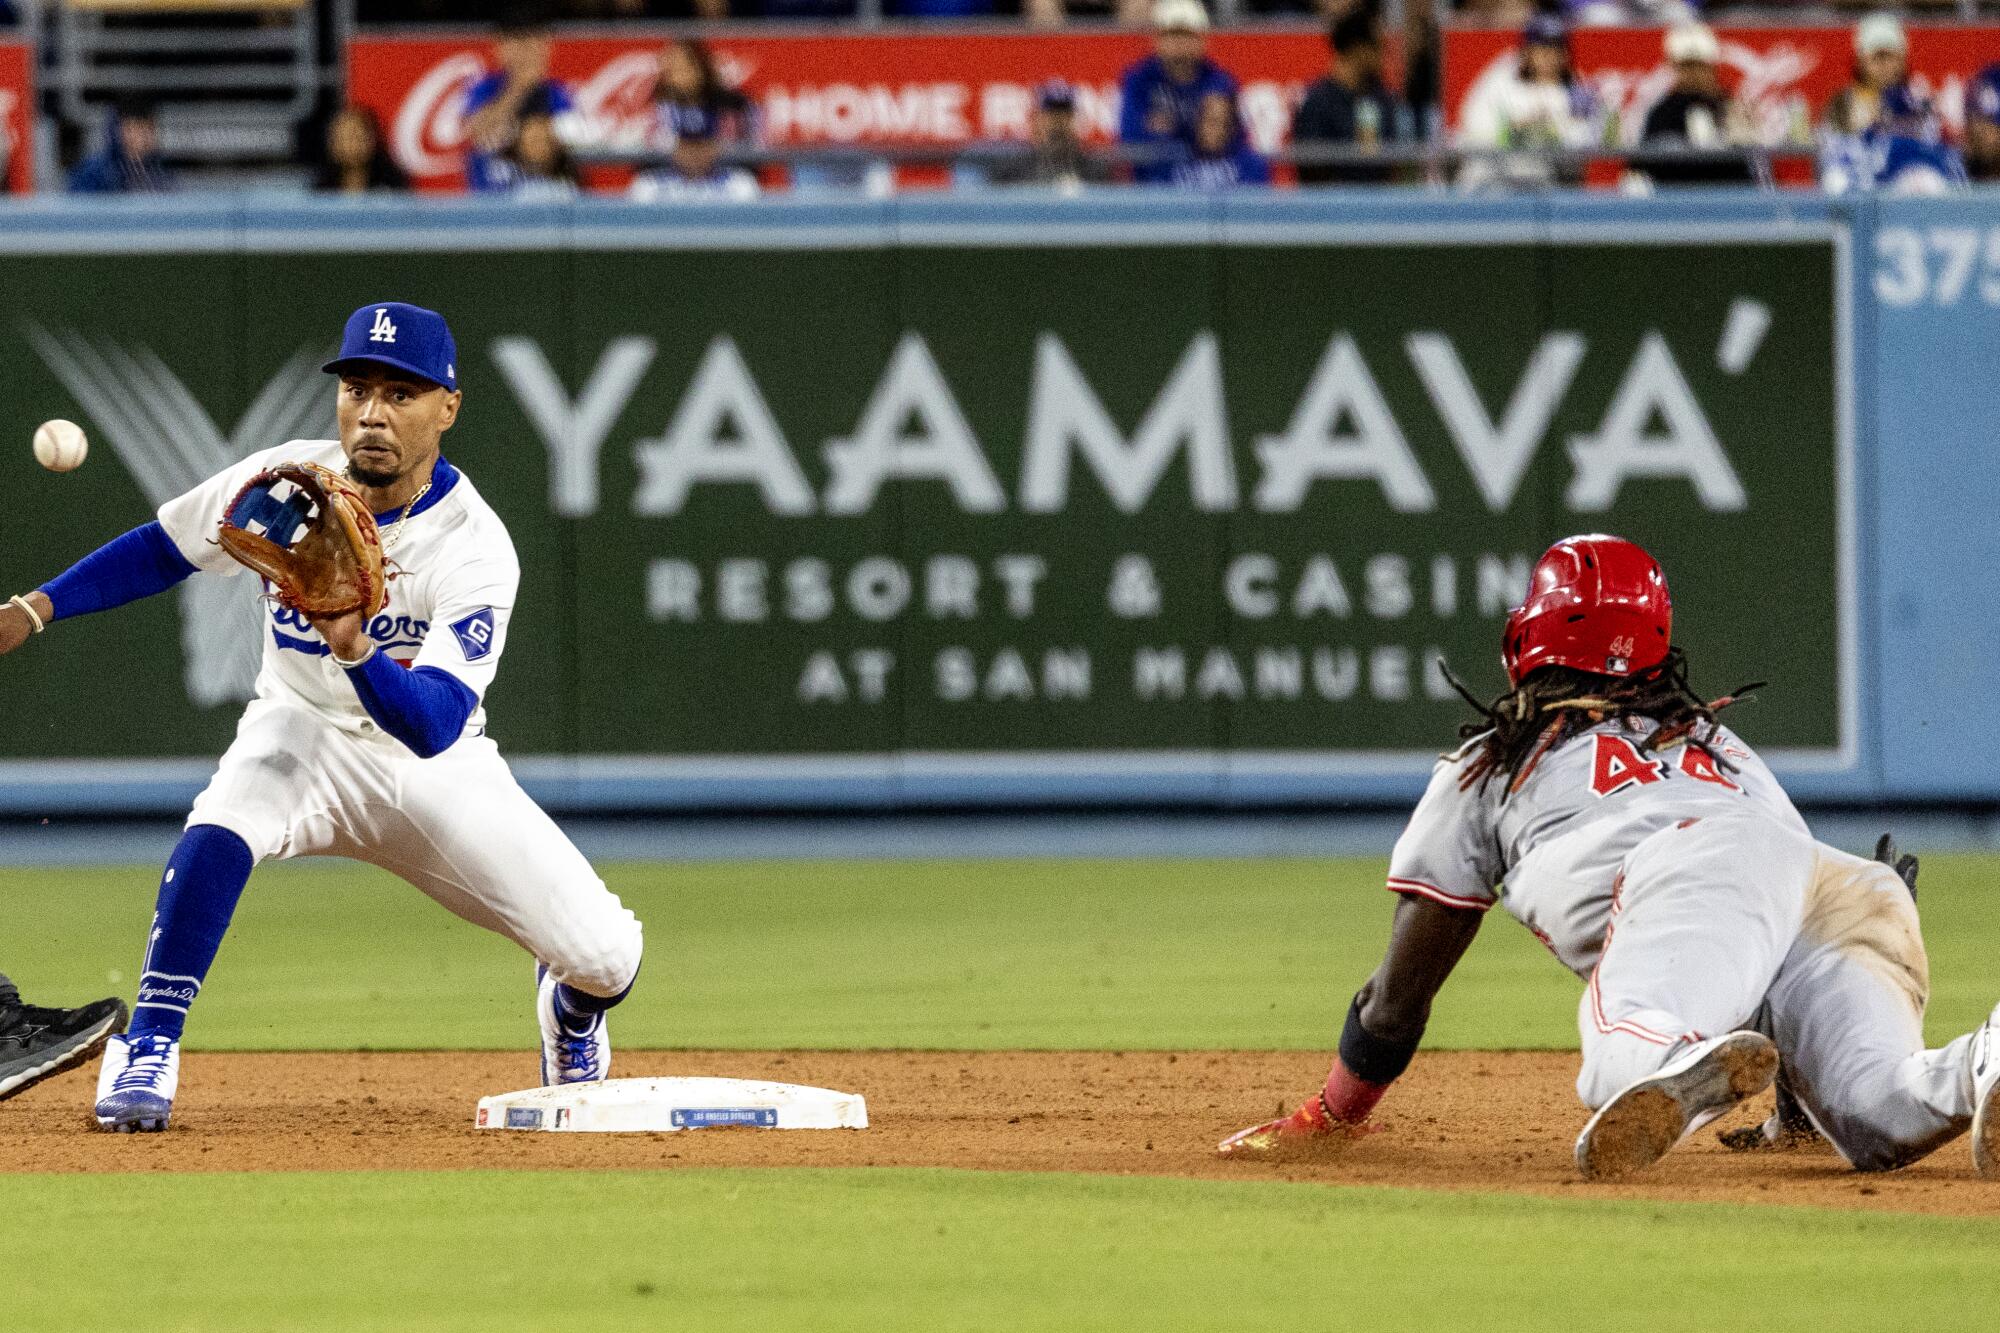 Dodgers shortstop Mookie Betts takes the throw from catcher Austin Barnes to tag out Reds shortstop Elly De La Cruz.